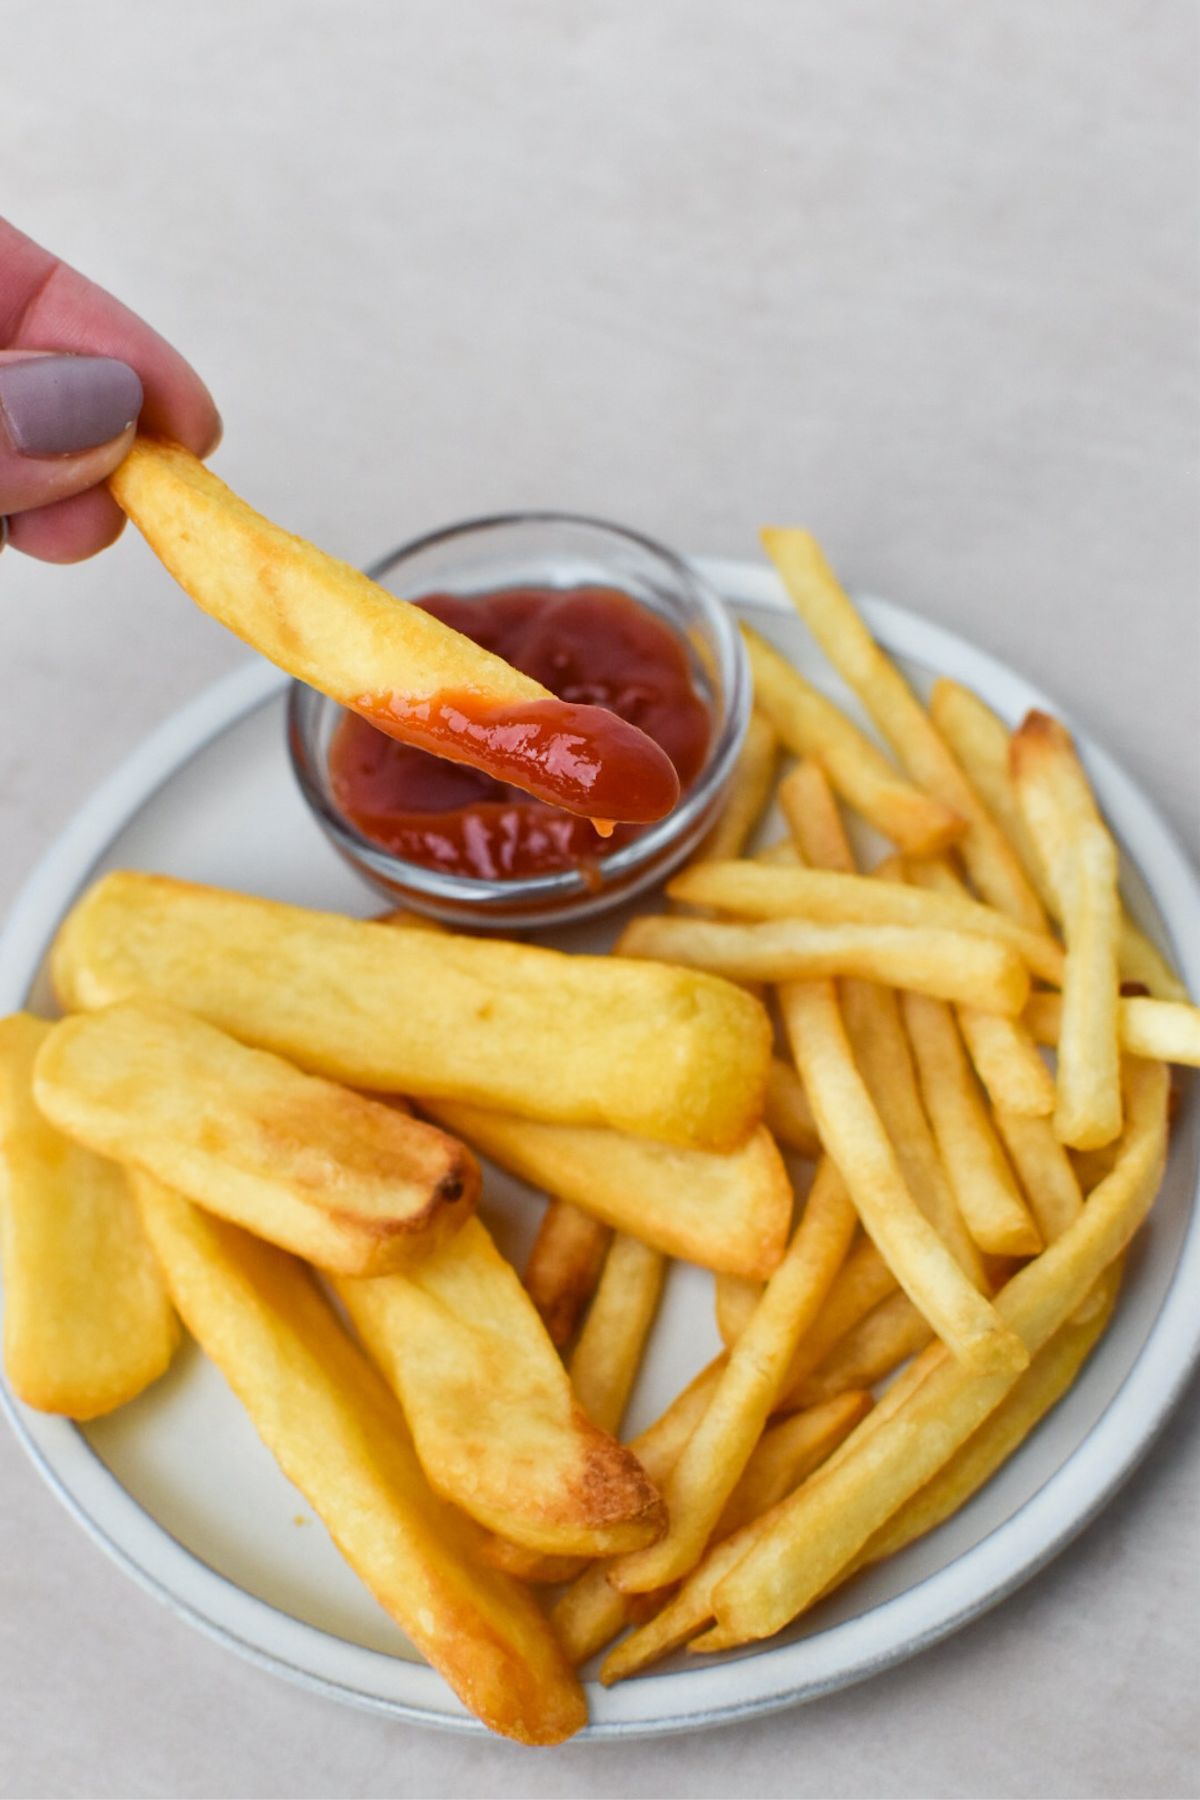 A french fry dipped in ketchup above a plate of steak fries and shoestring french fries.